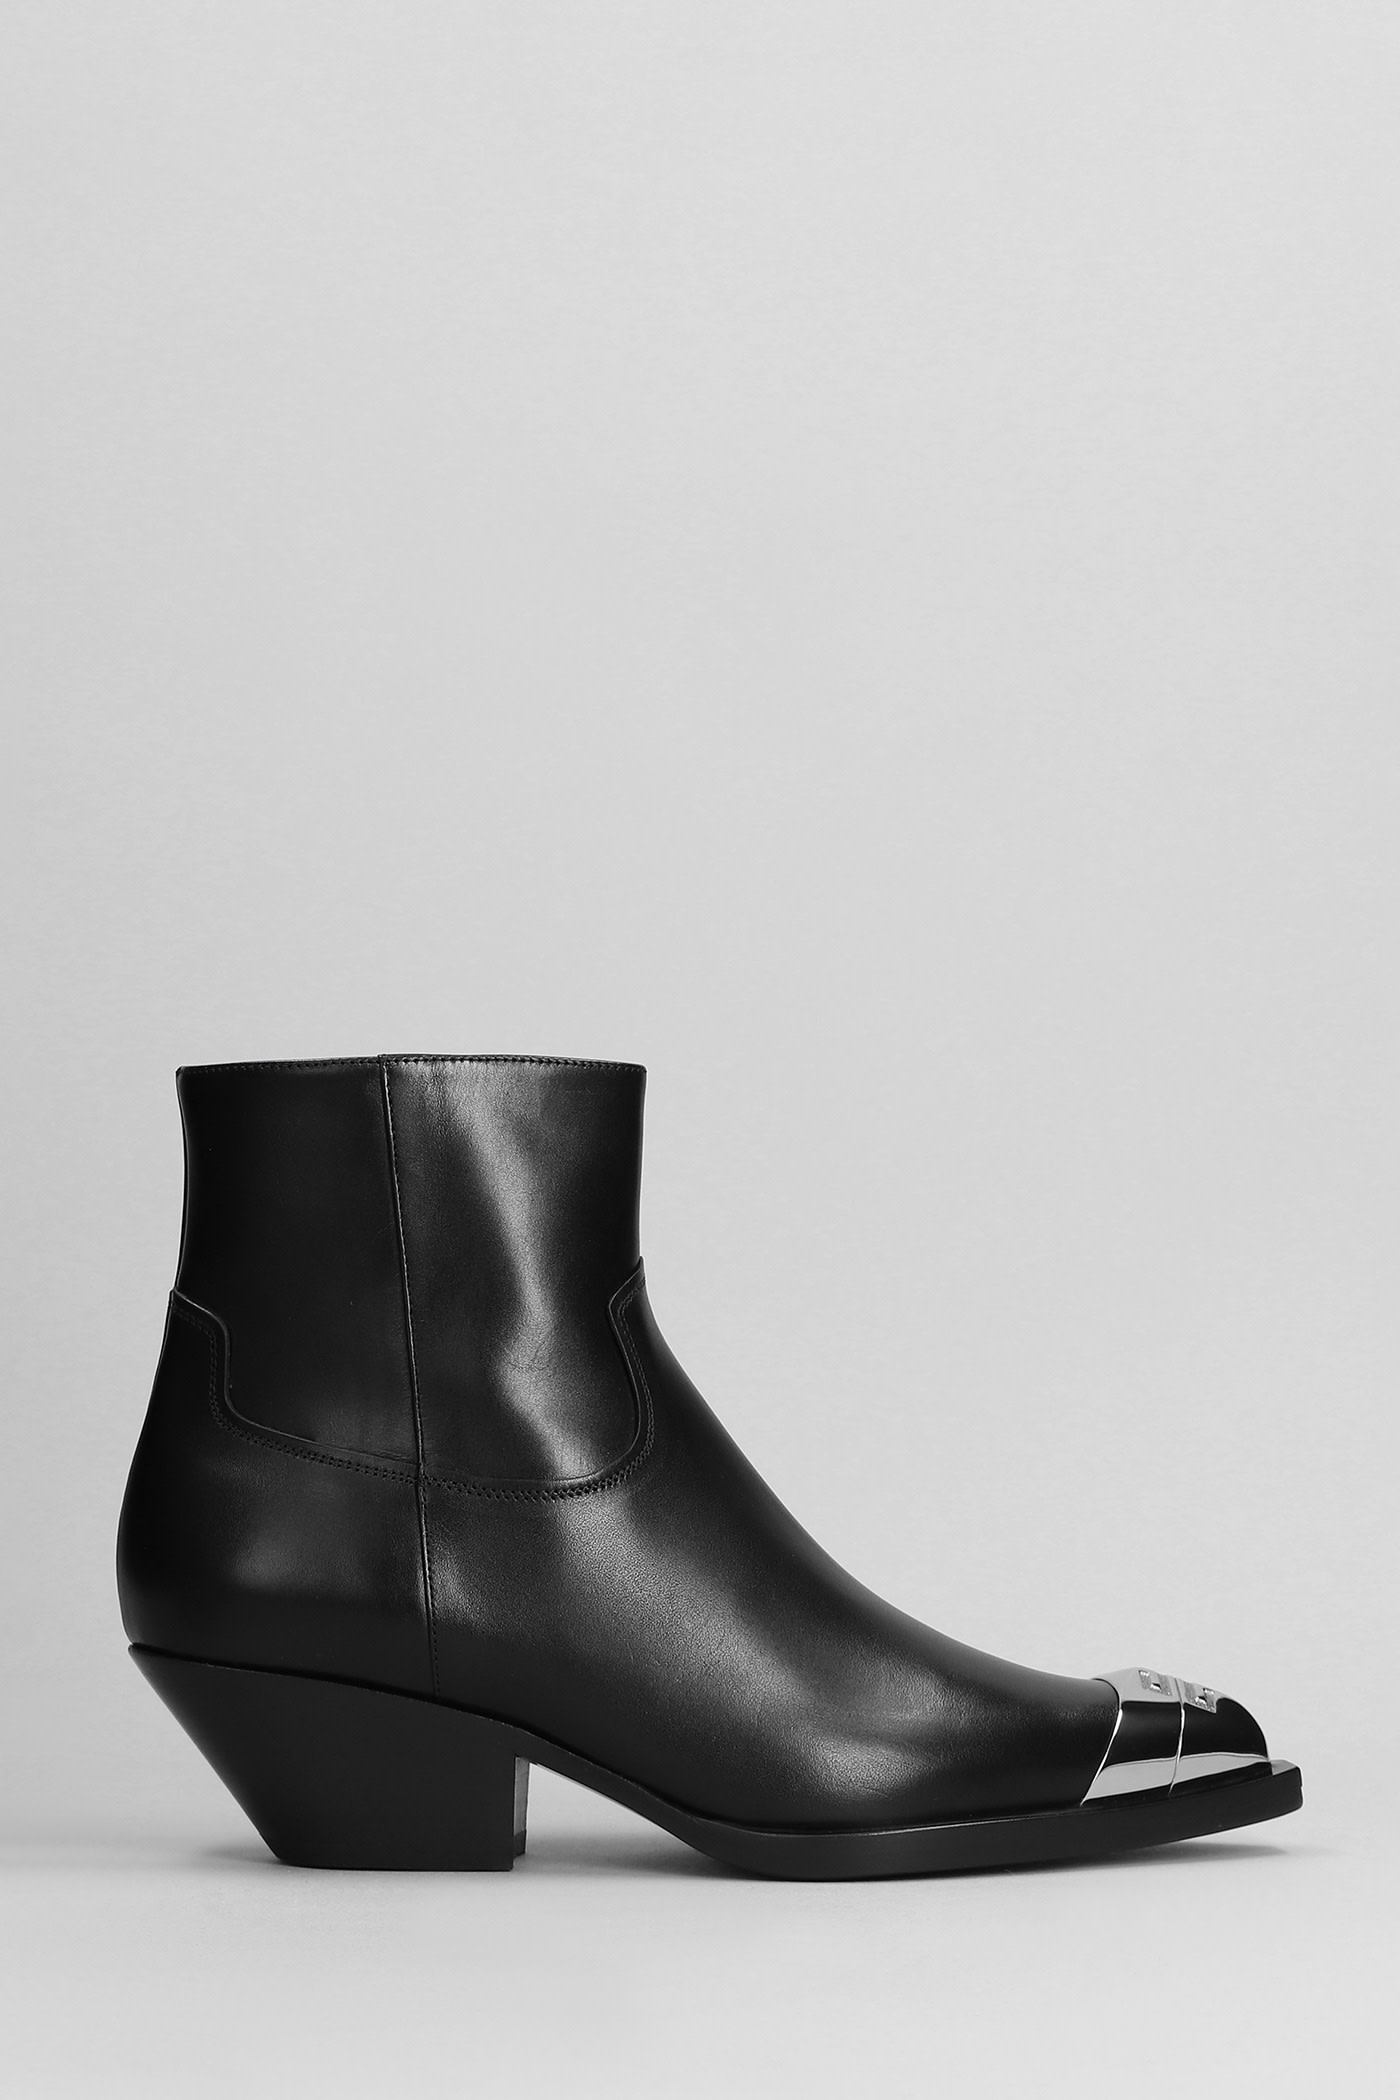 Low Heels Ankle Boots In Black Leather